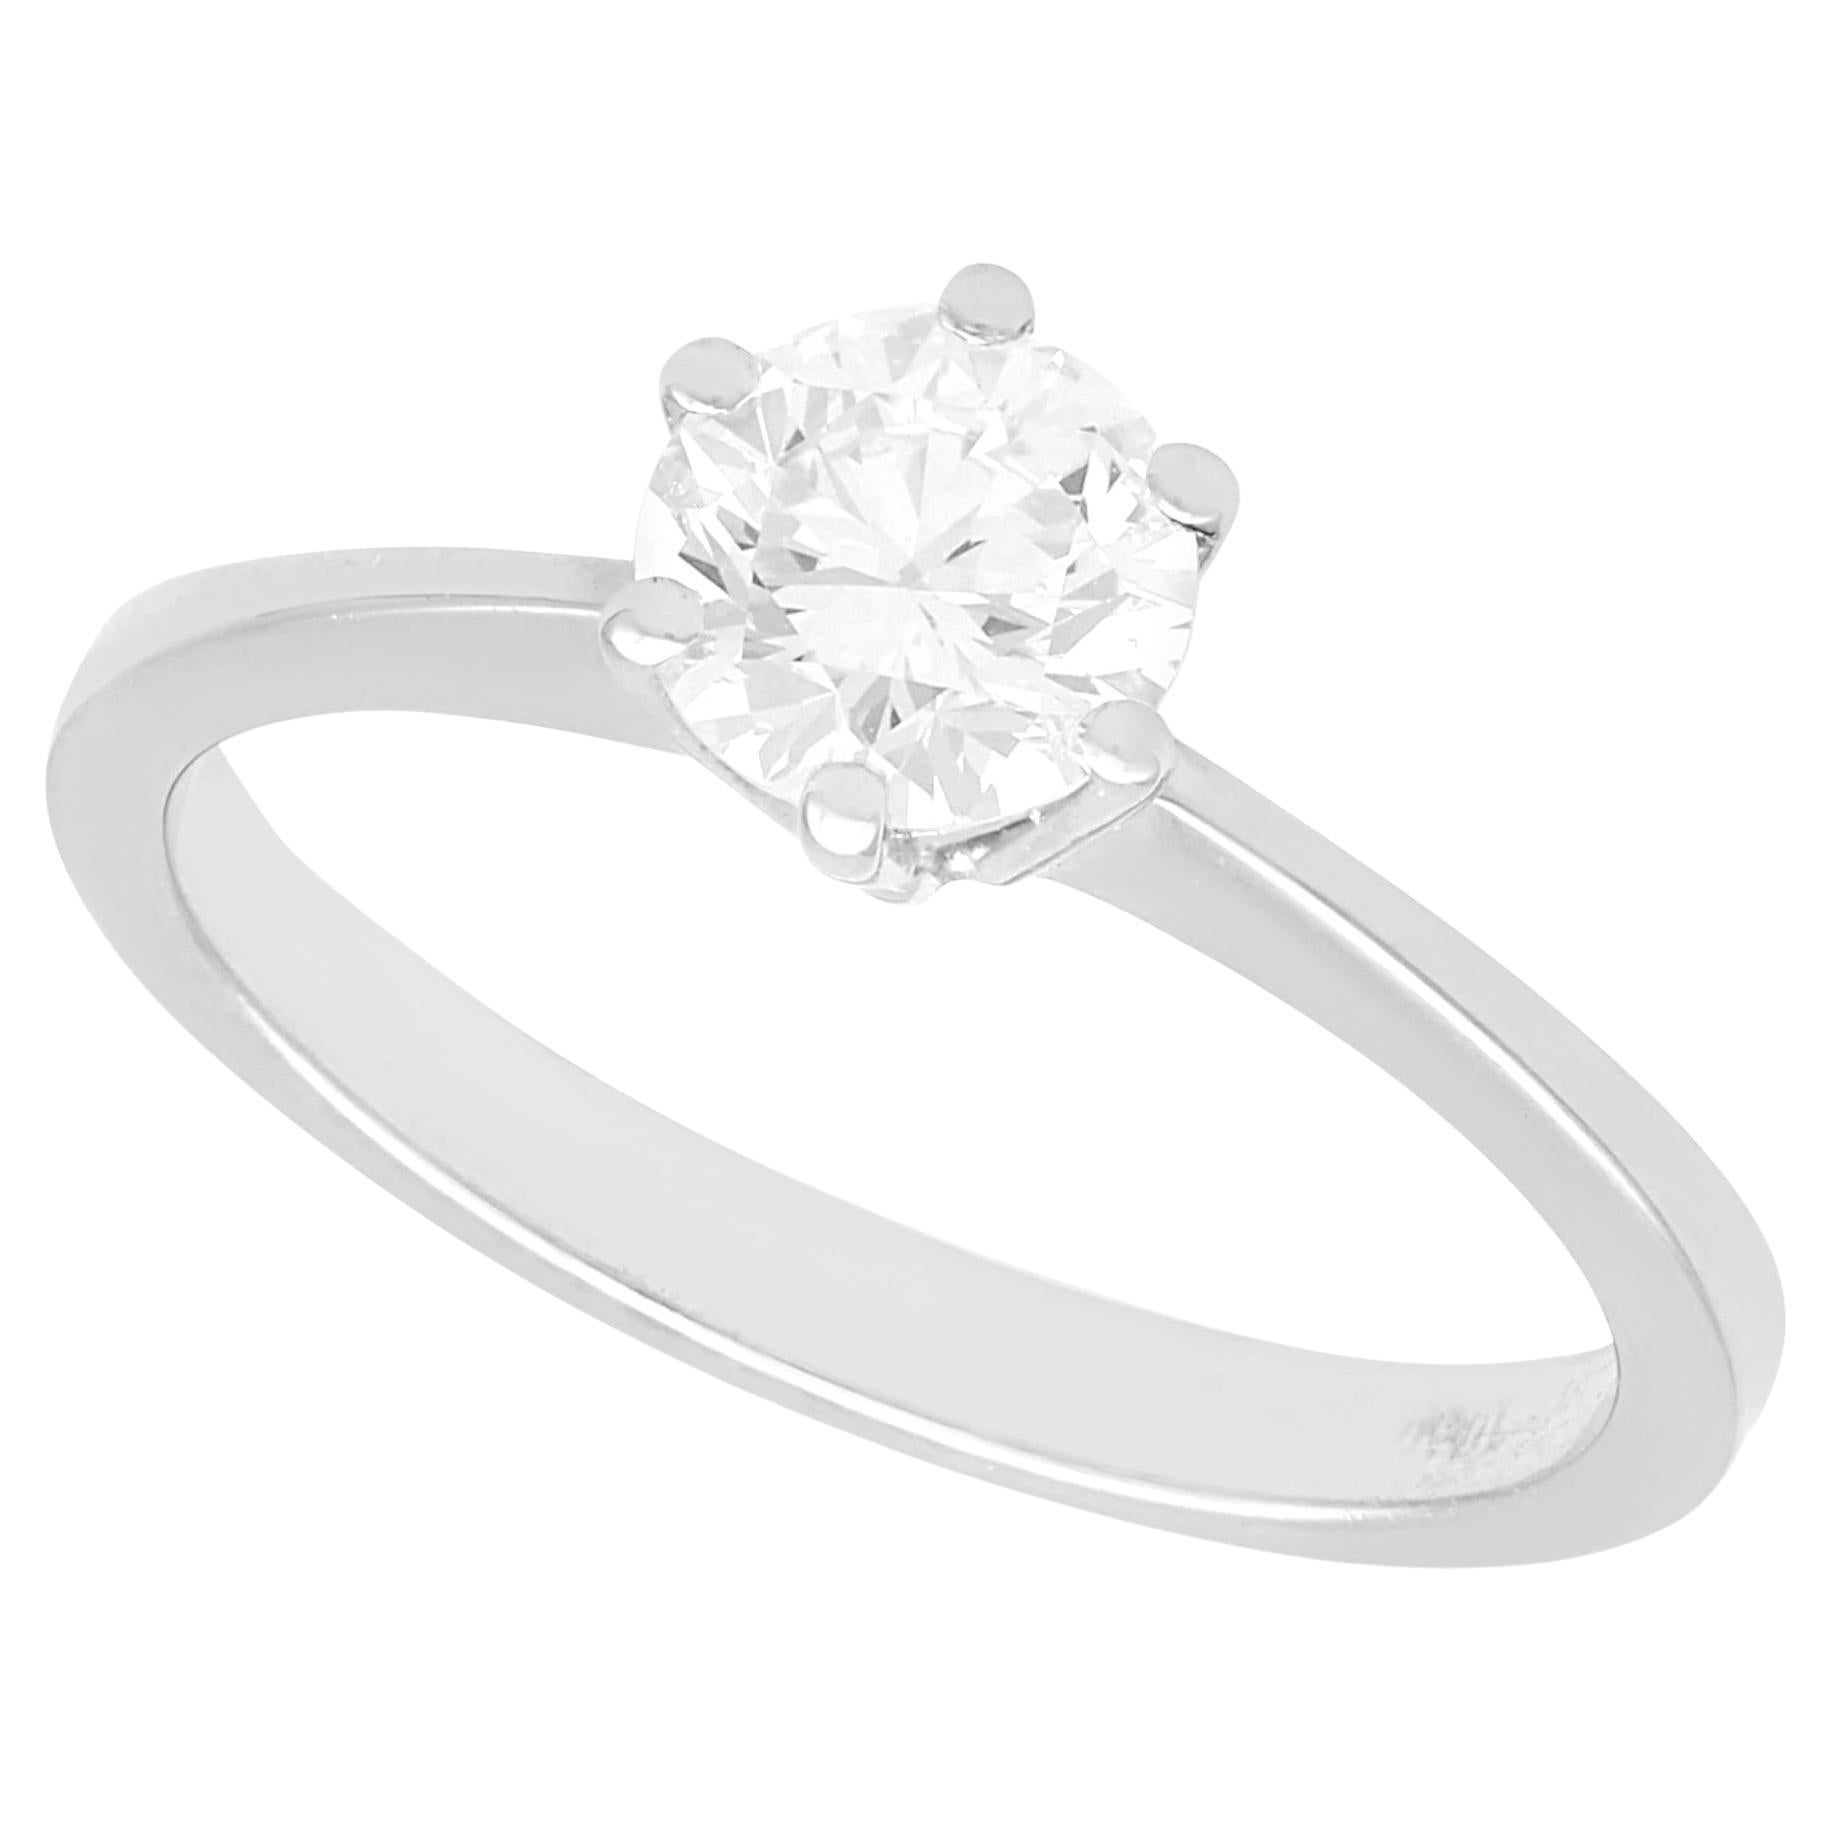 Vintage 0.72 Carat Diamond Solitaire Engagement Ring in 18k White Gold For Sale